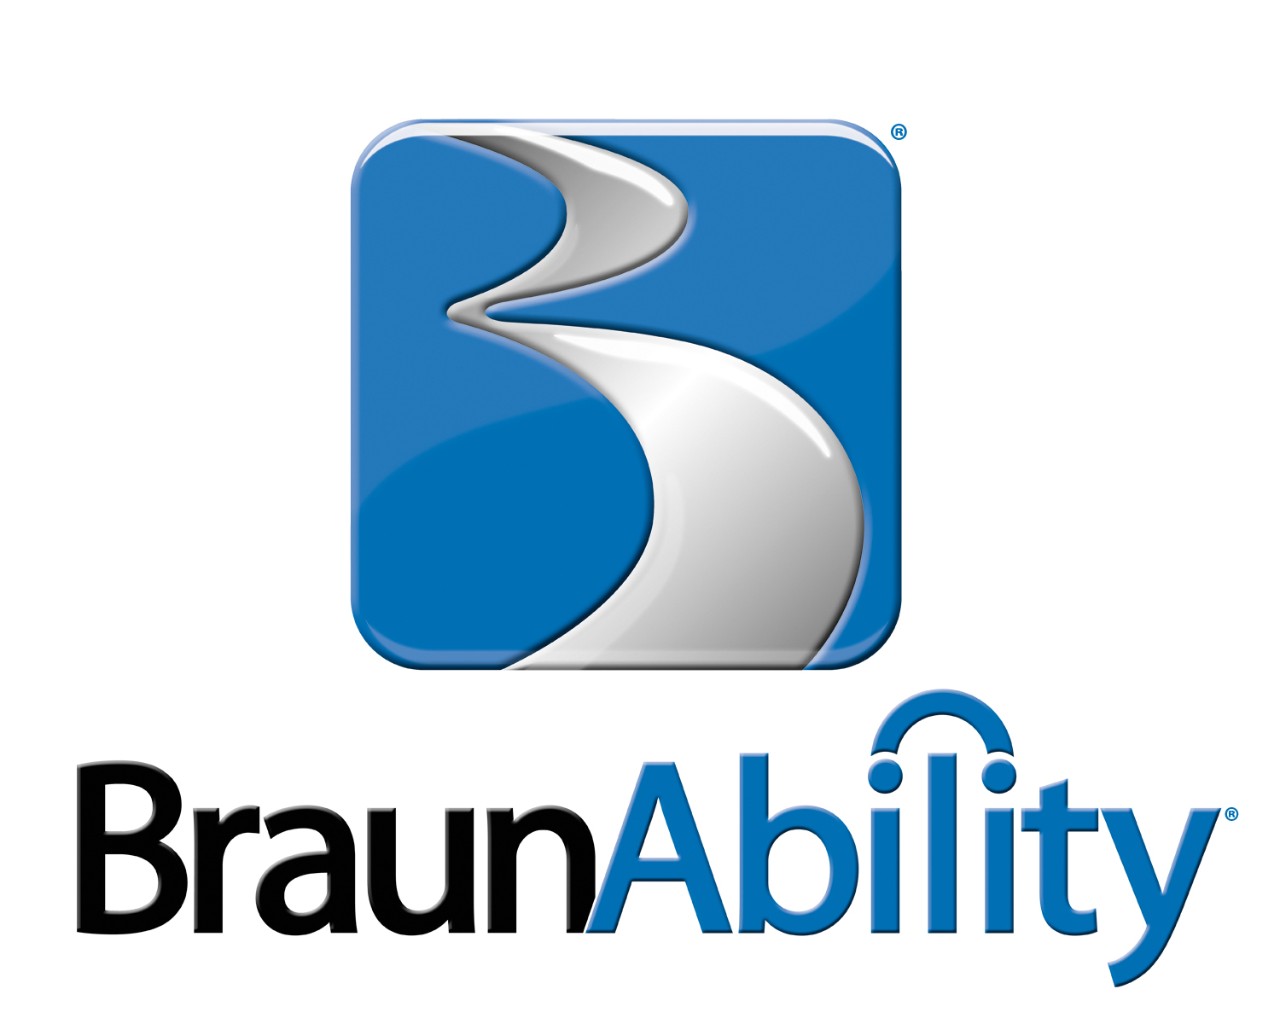 BraunAbility Logo - A blue square with a stylized B on it, and beneath it, the word BraunAbility in blue.